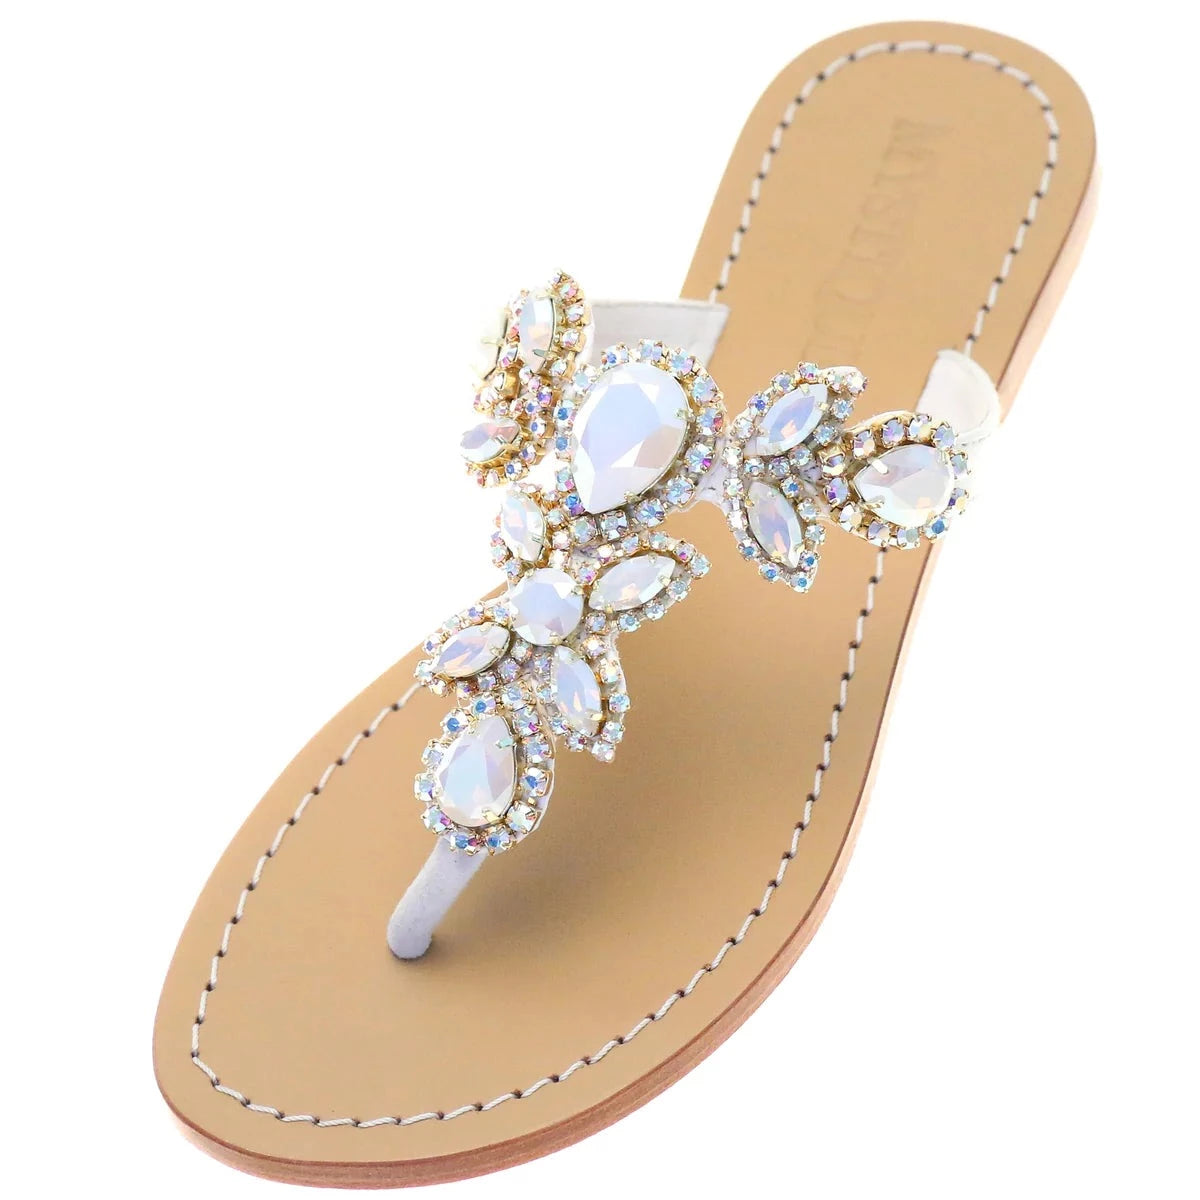 Mystique White leather sandals with white opal stones and AB crystals. 